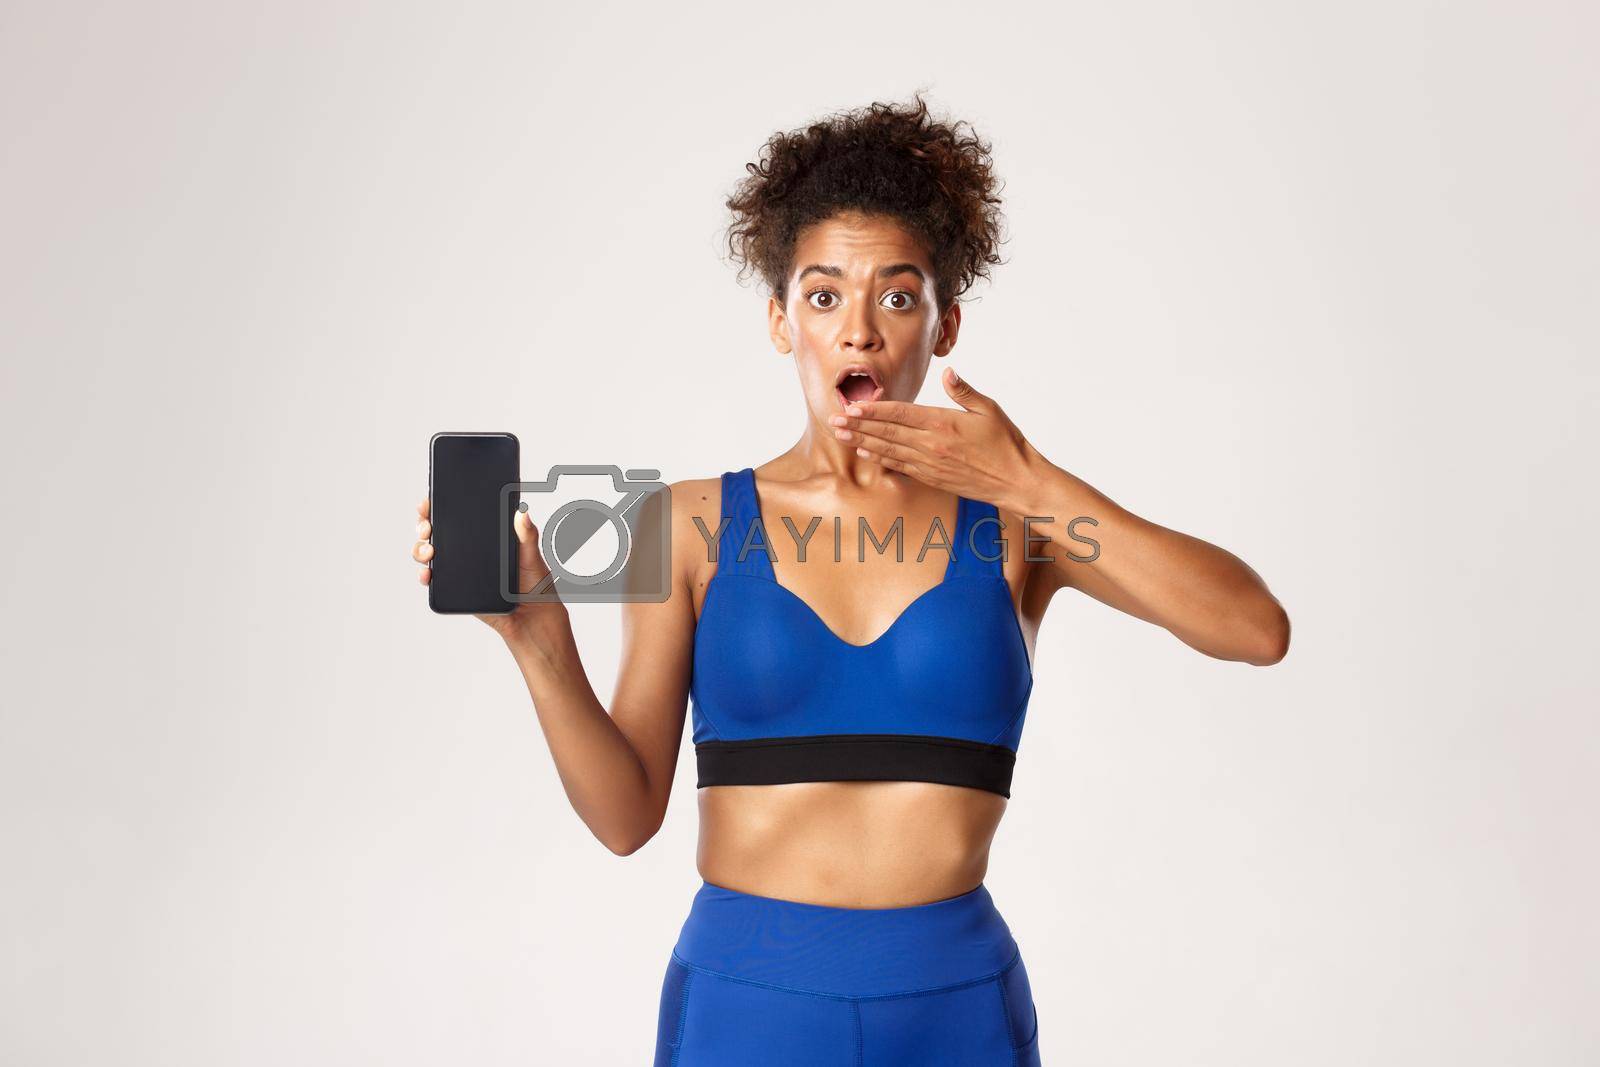 Sport and technology concept. Surprised african-american sportswoman in fitness clothing, gasping amazed, showing mobile phone screen, white background.